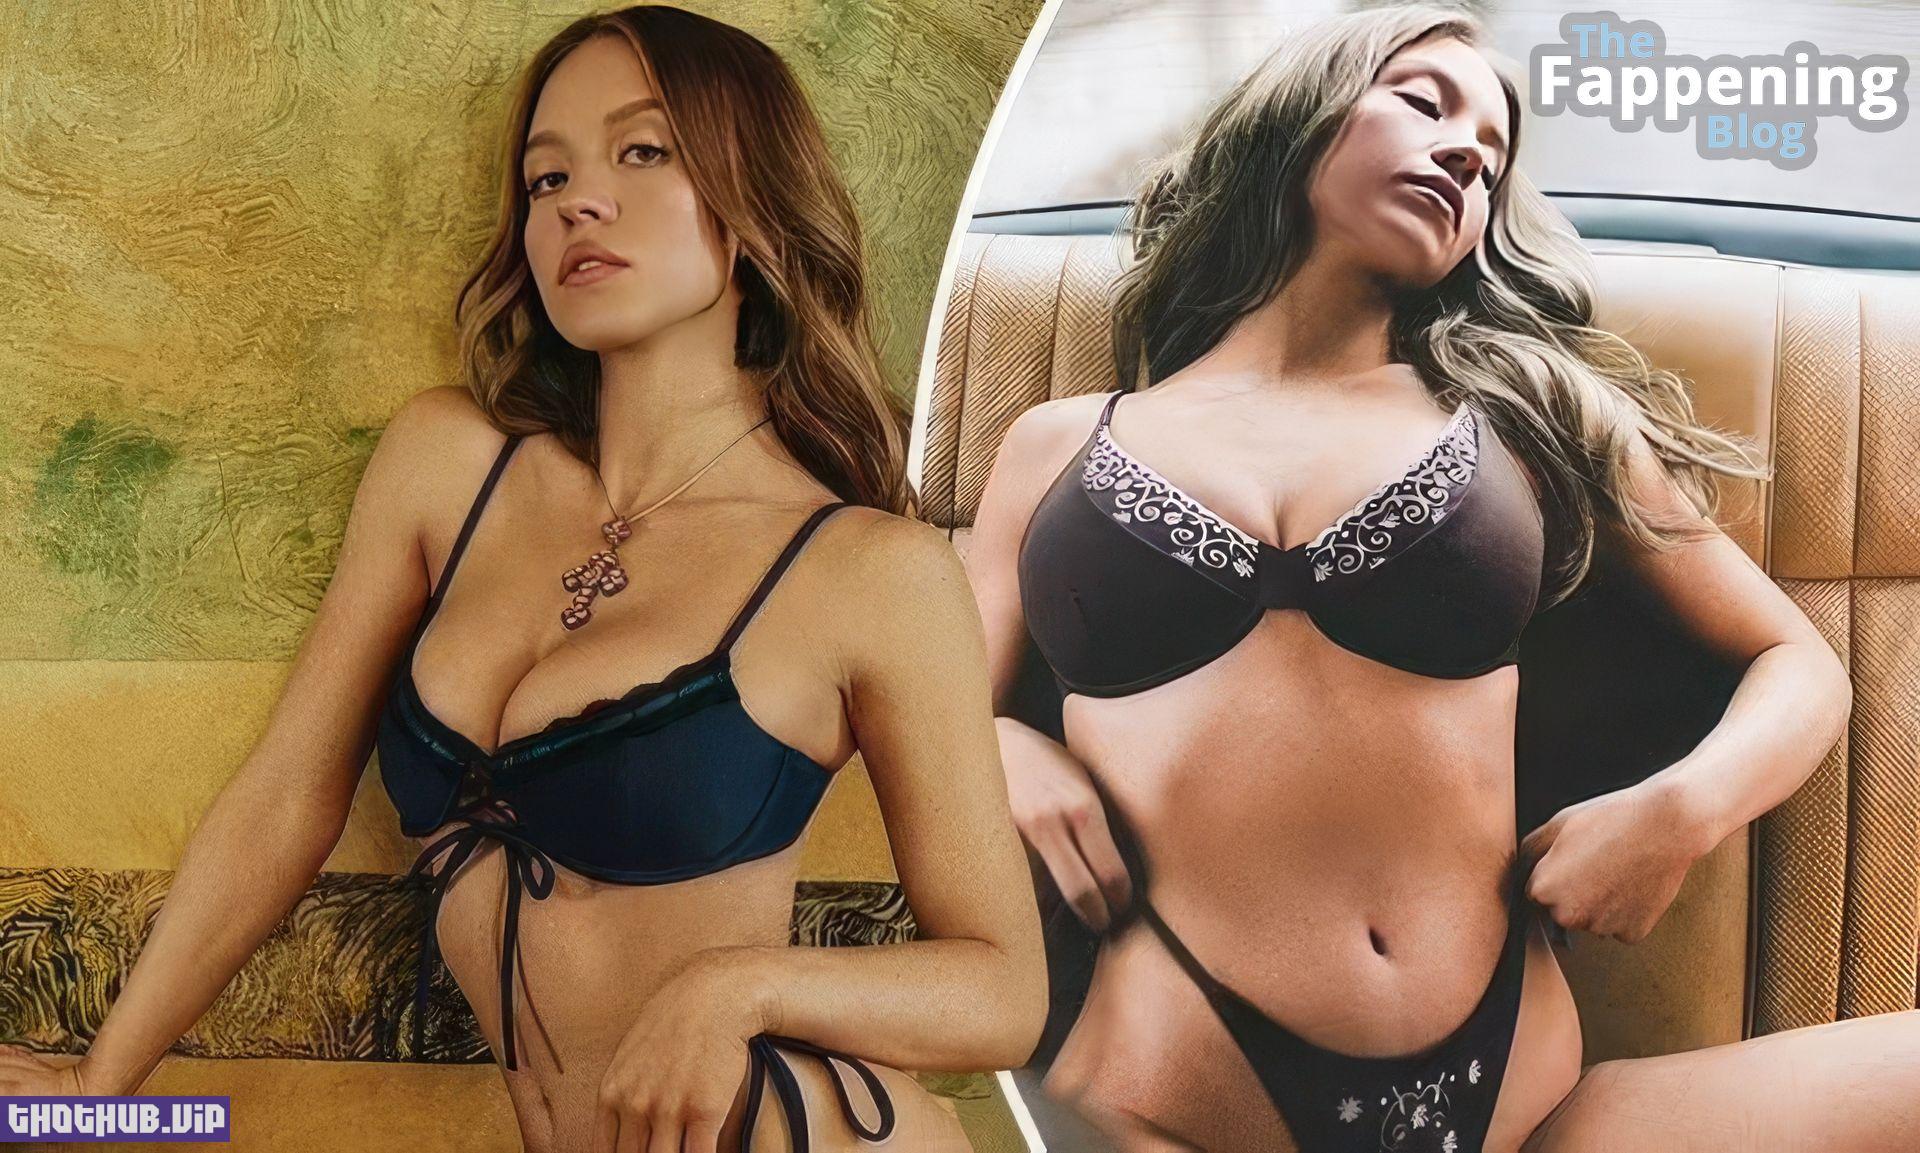 Sydney Sweeney Spectacular Boobs in Lingerie 2 thefappeningblog.com 2